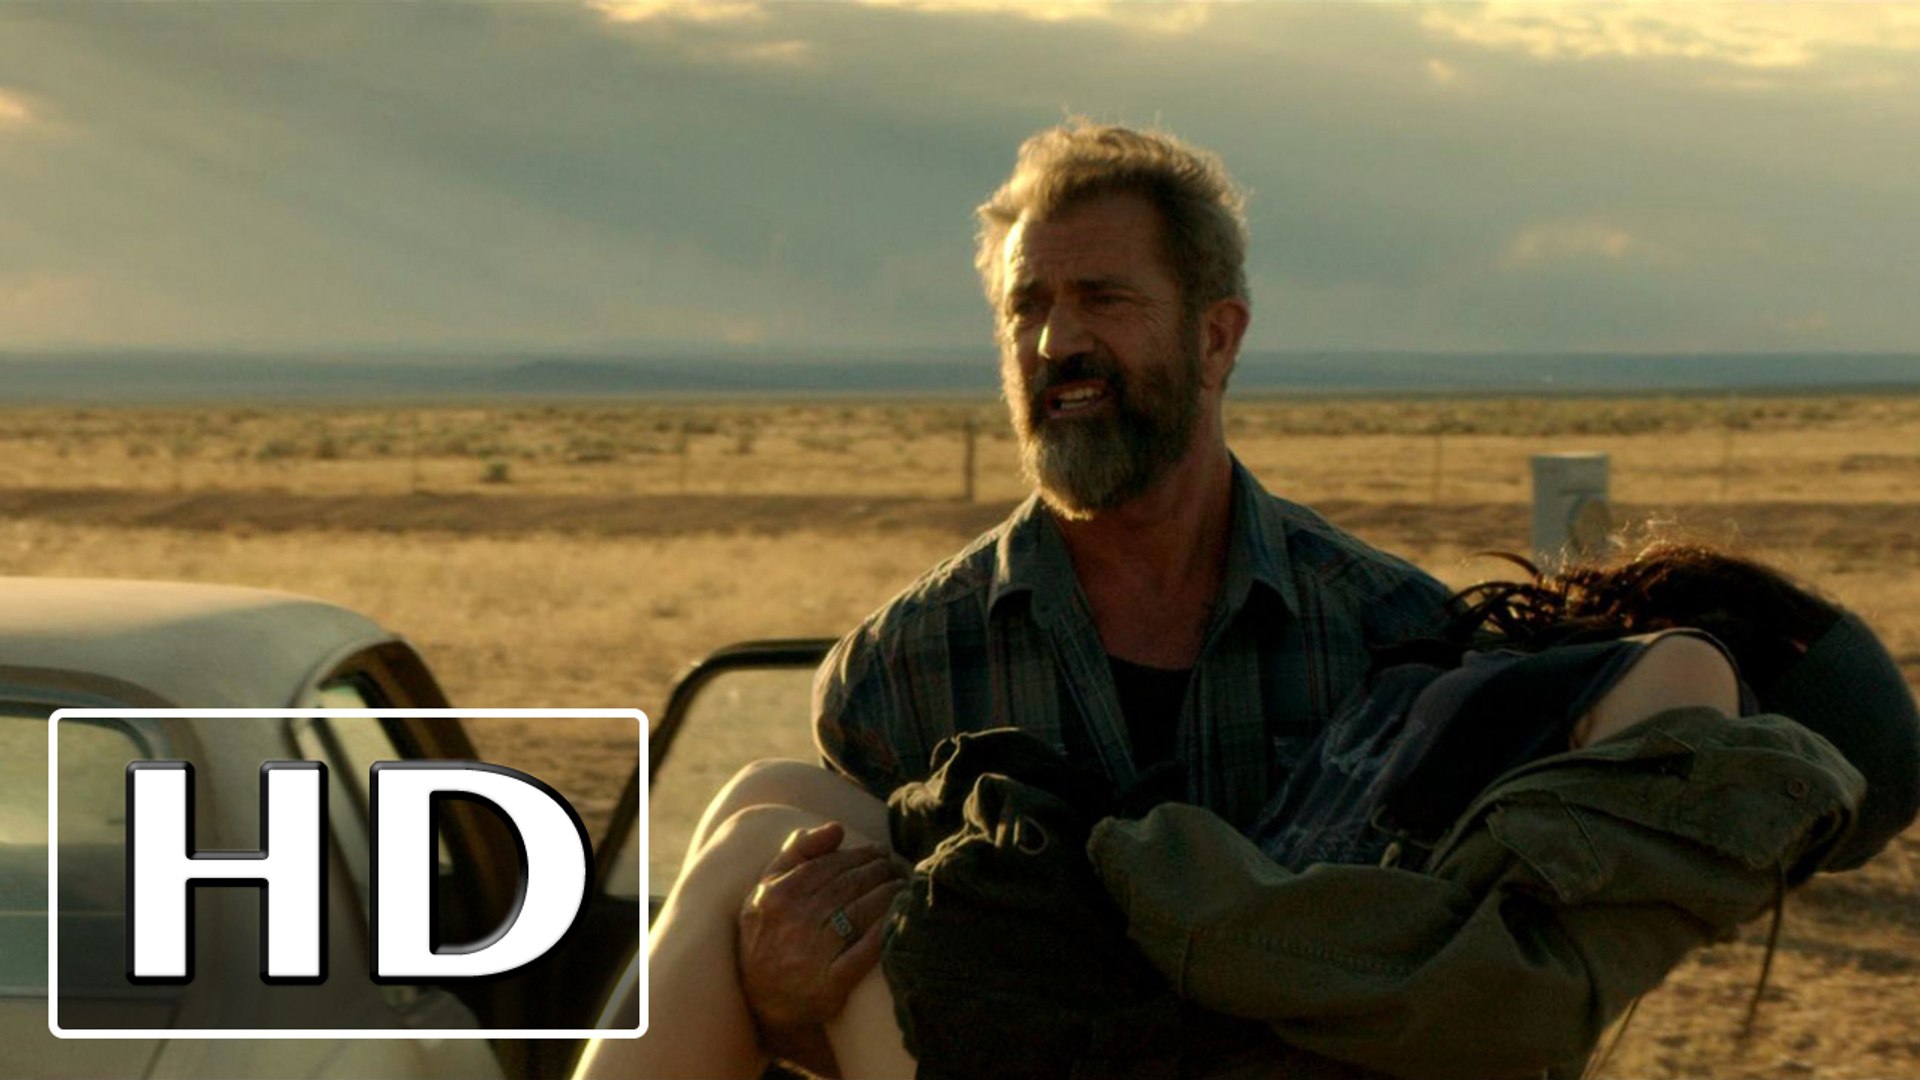 Watch Blood Father Full Movie (2016) 720p HD Online - New Action, Thriller Movies 2016